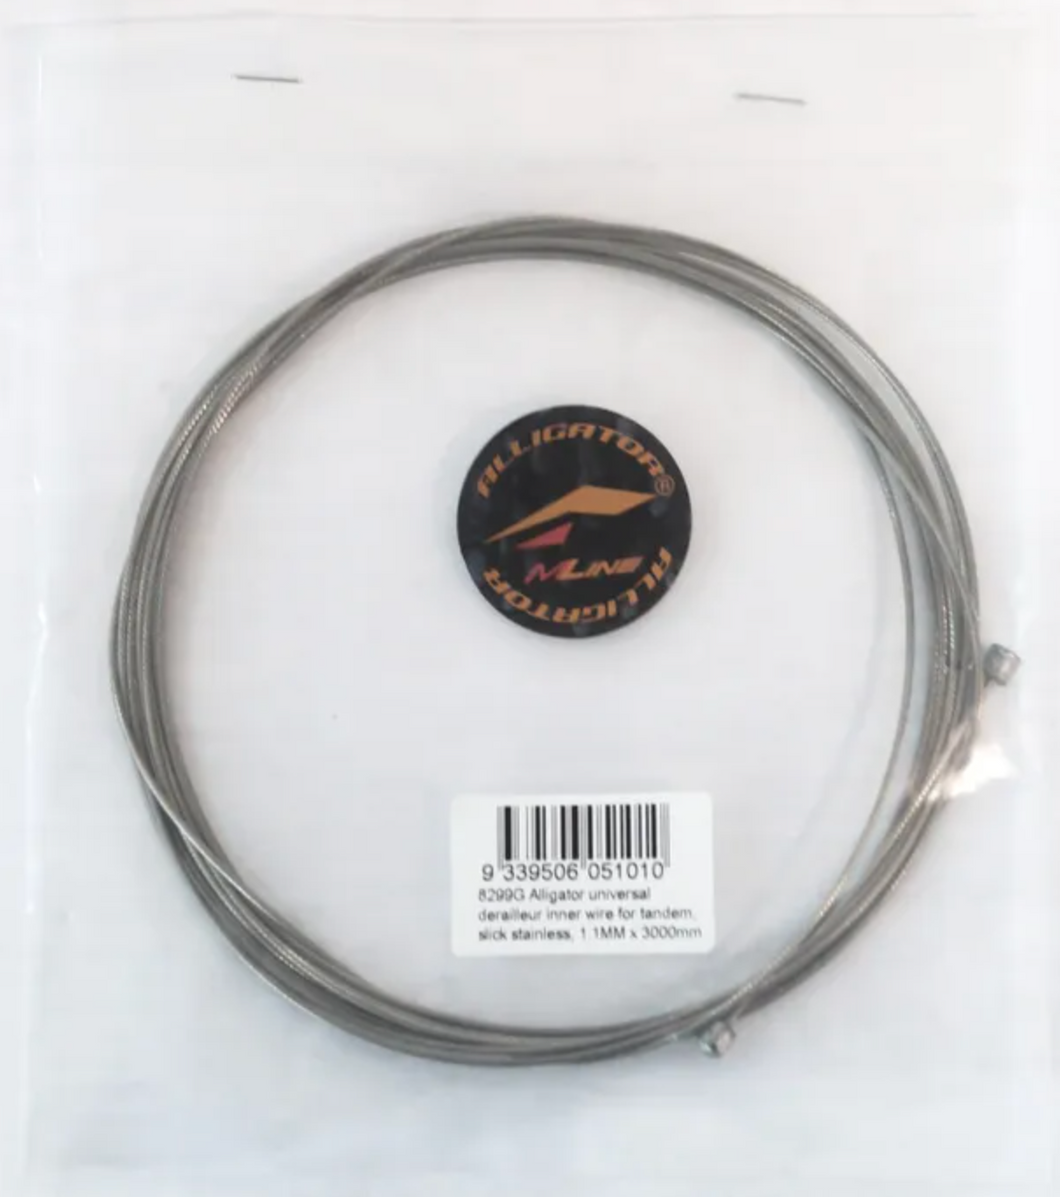 Alligator GEAR Inner cable, for TANDEM, '31 STRAND Superior Shine Slick' Stainless Dia.1.1mm x 3000mm (Shimano/Sram)